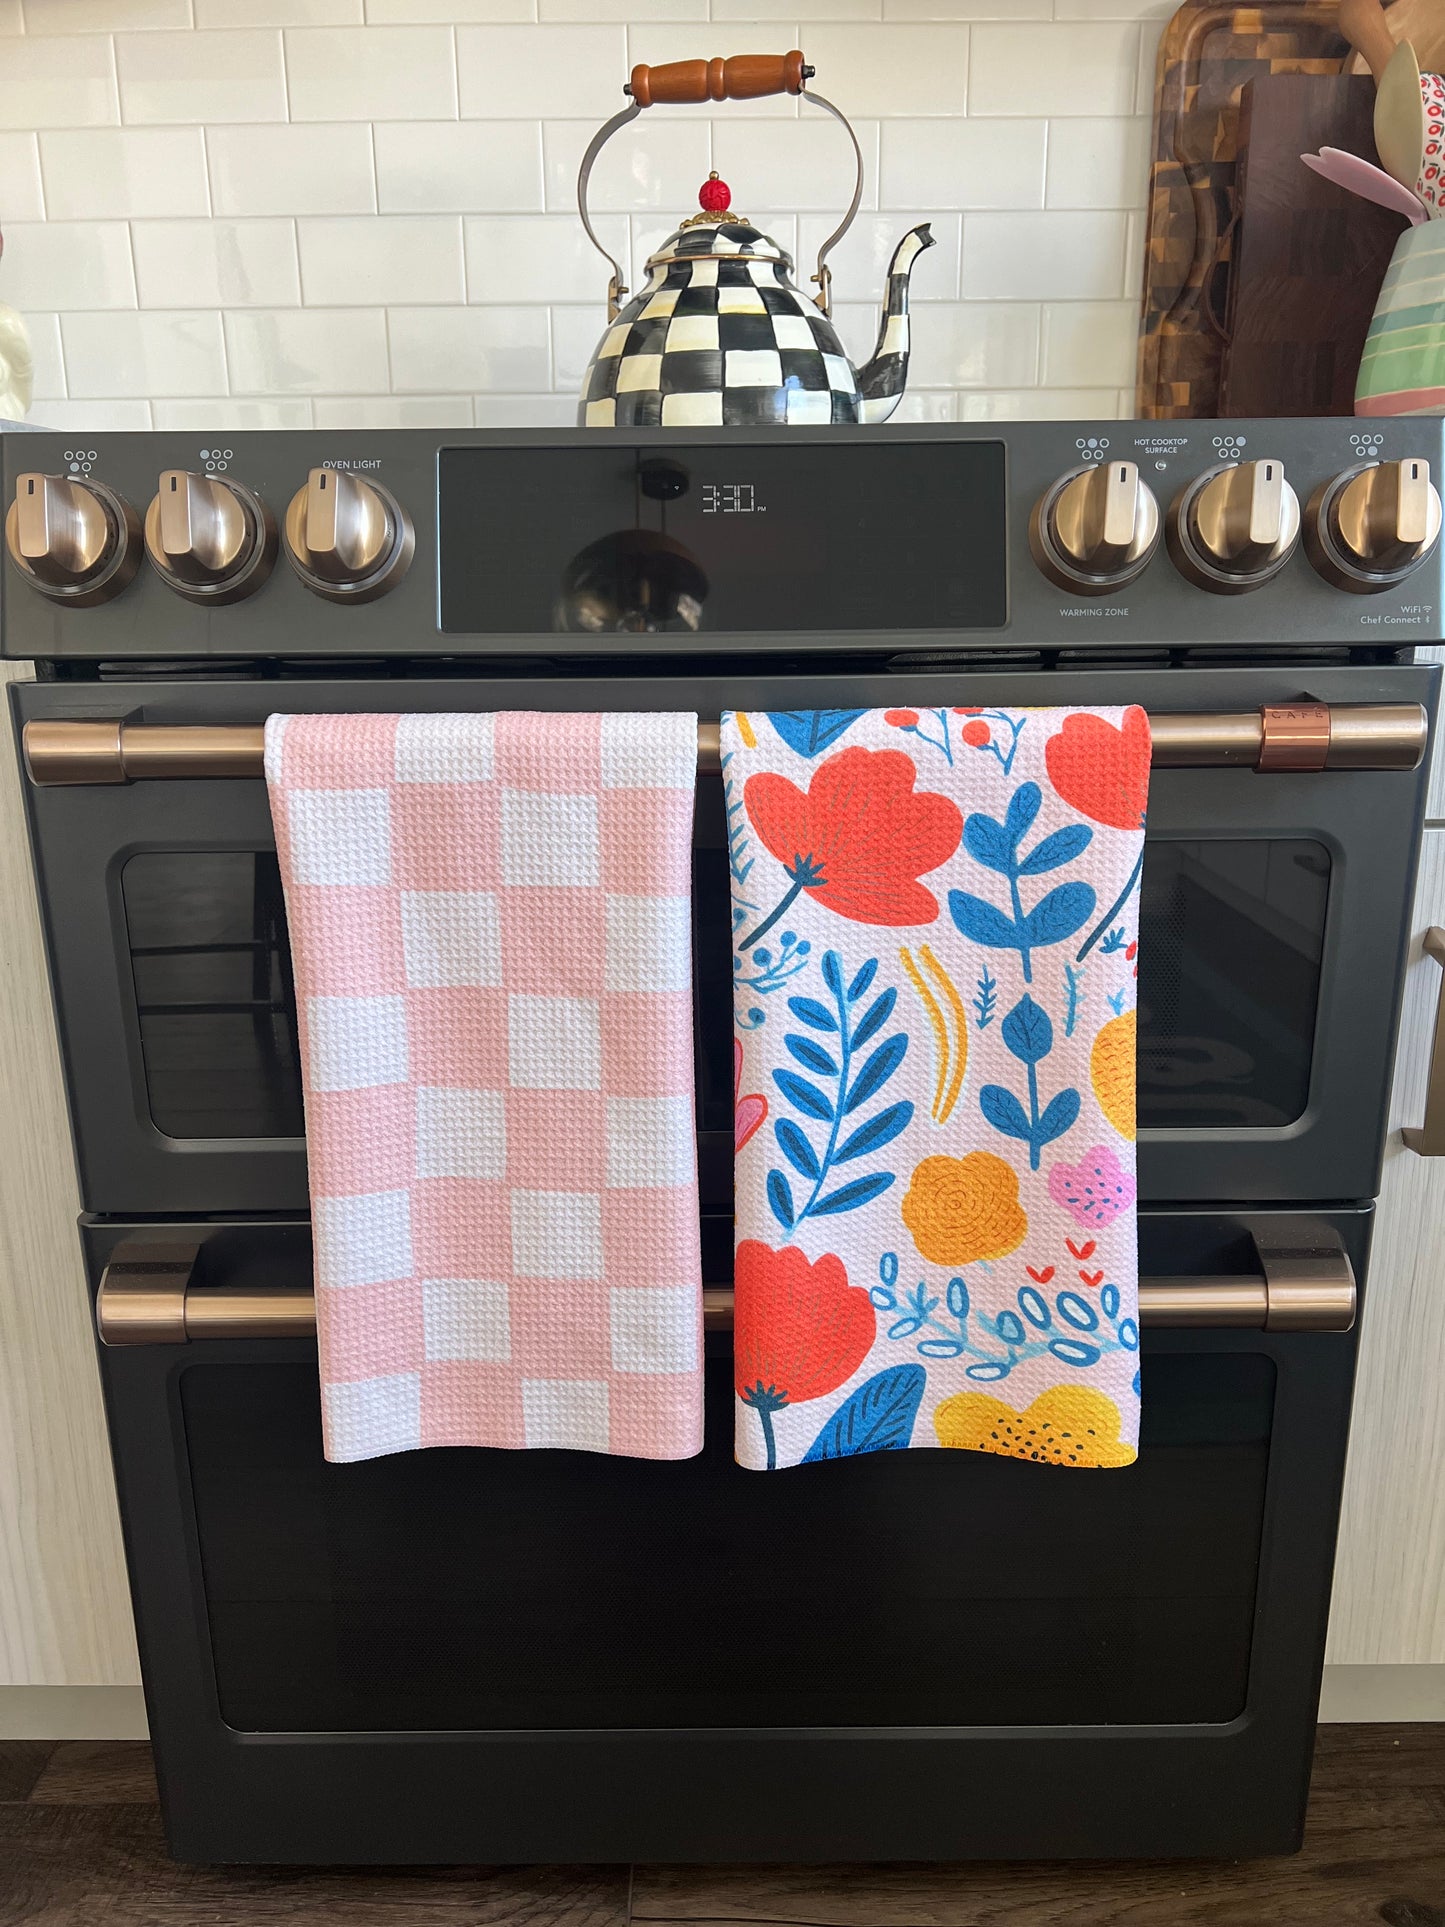 Spring into Action: Single-Sided Hand Towel